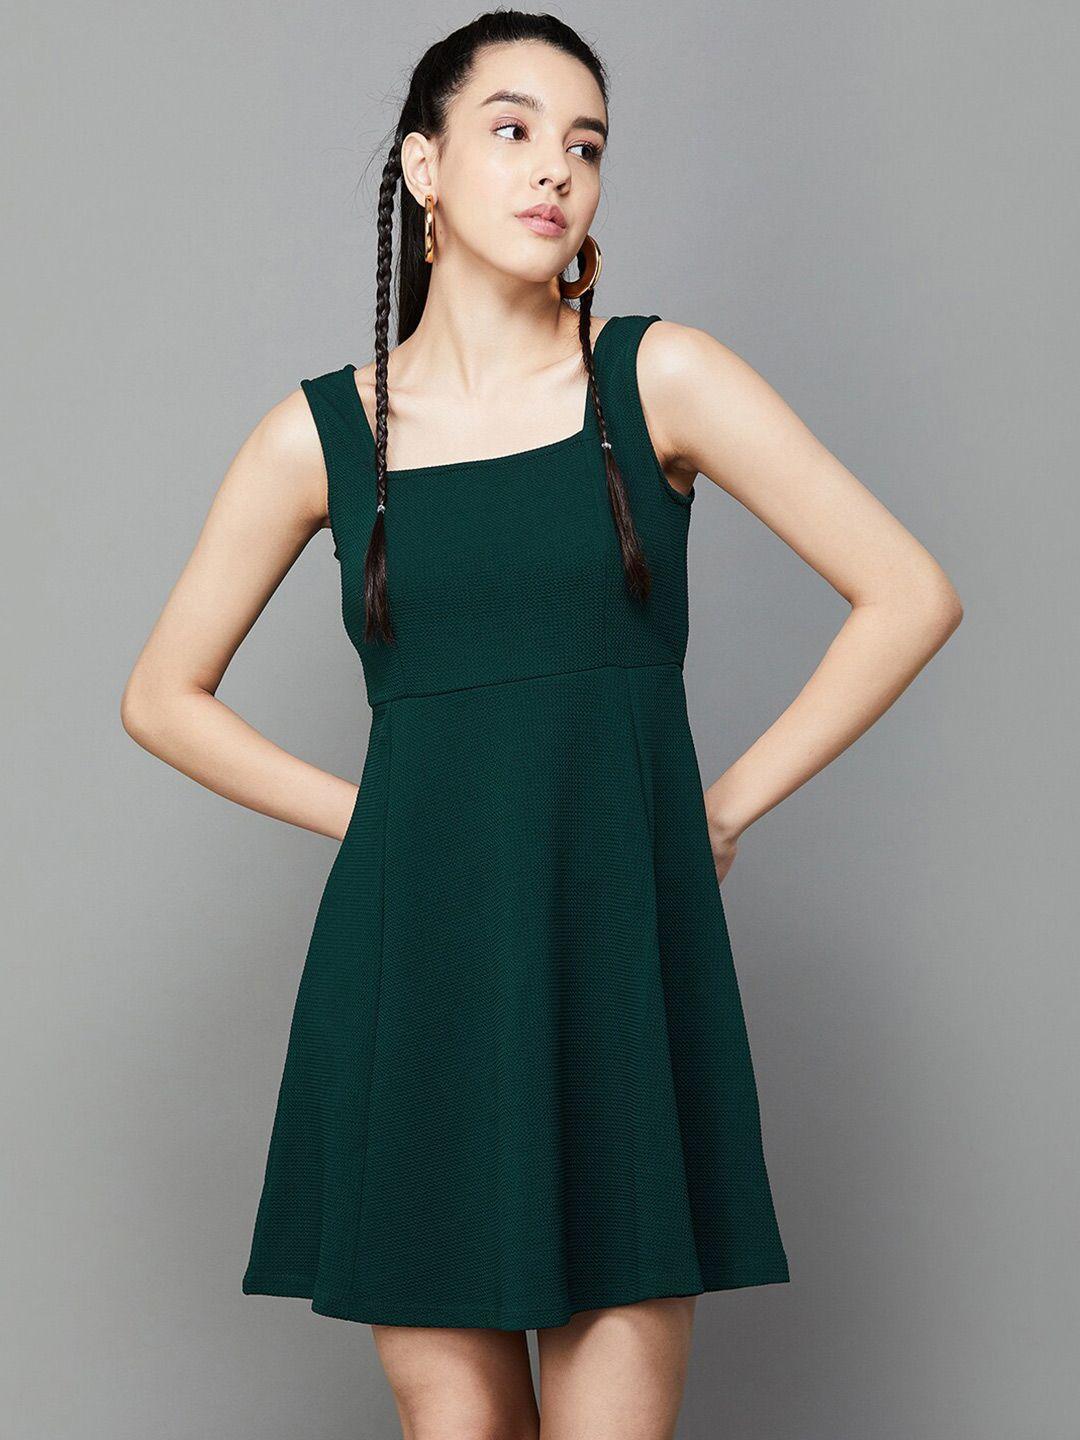 ginger-by-lifestyle-square-neck-sleeveless-a-line-dress